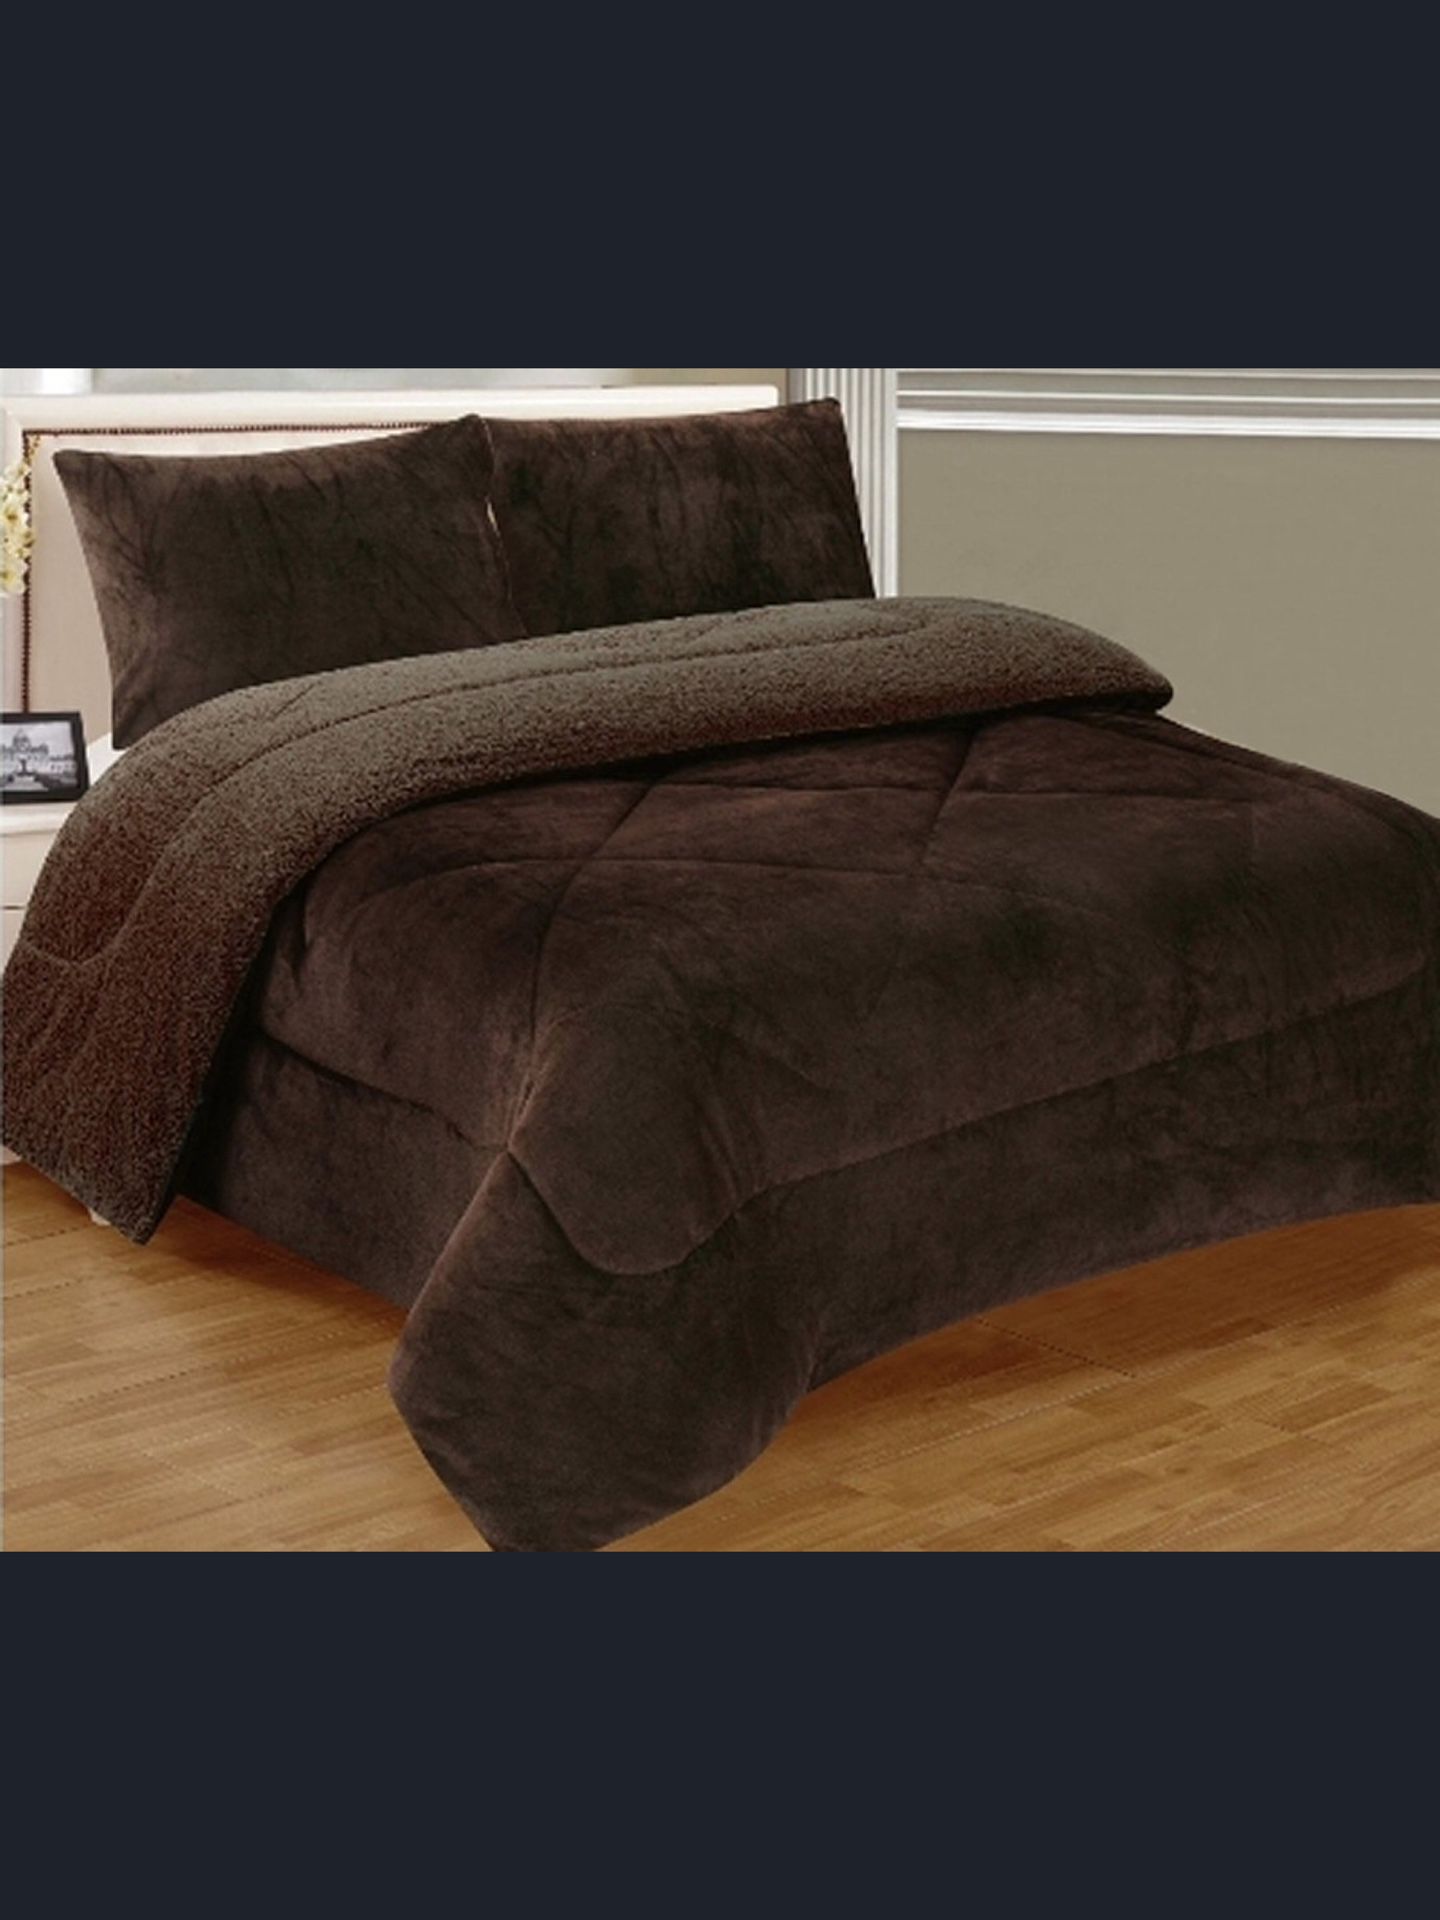 Brand New Brown Warm Super Thick Soft Borrego Sherpa Quilted Blanket 3 Piece Set with Pillow Shams King Size